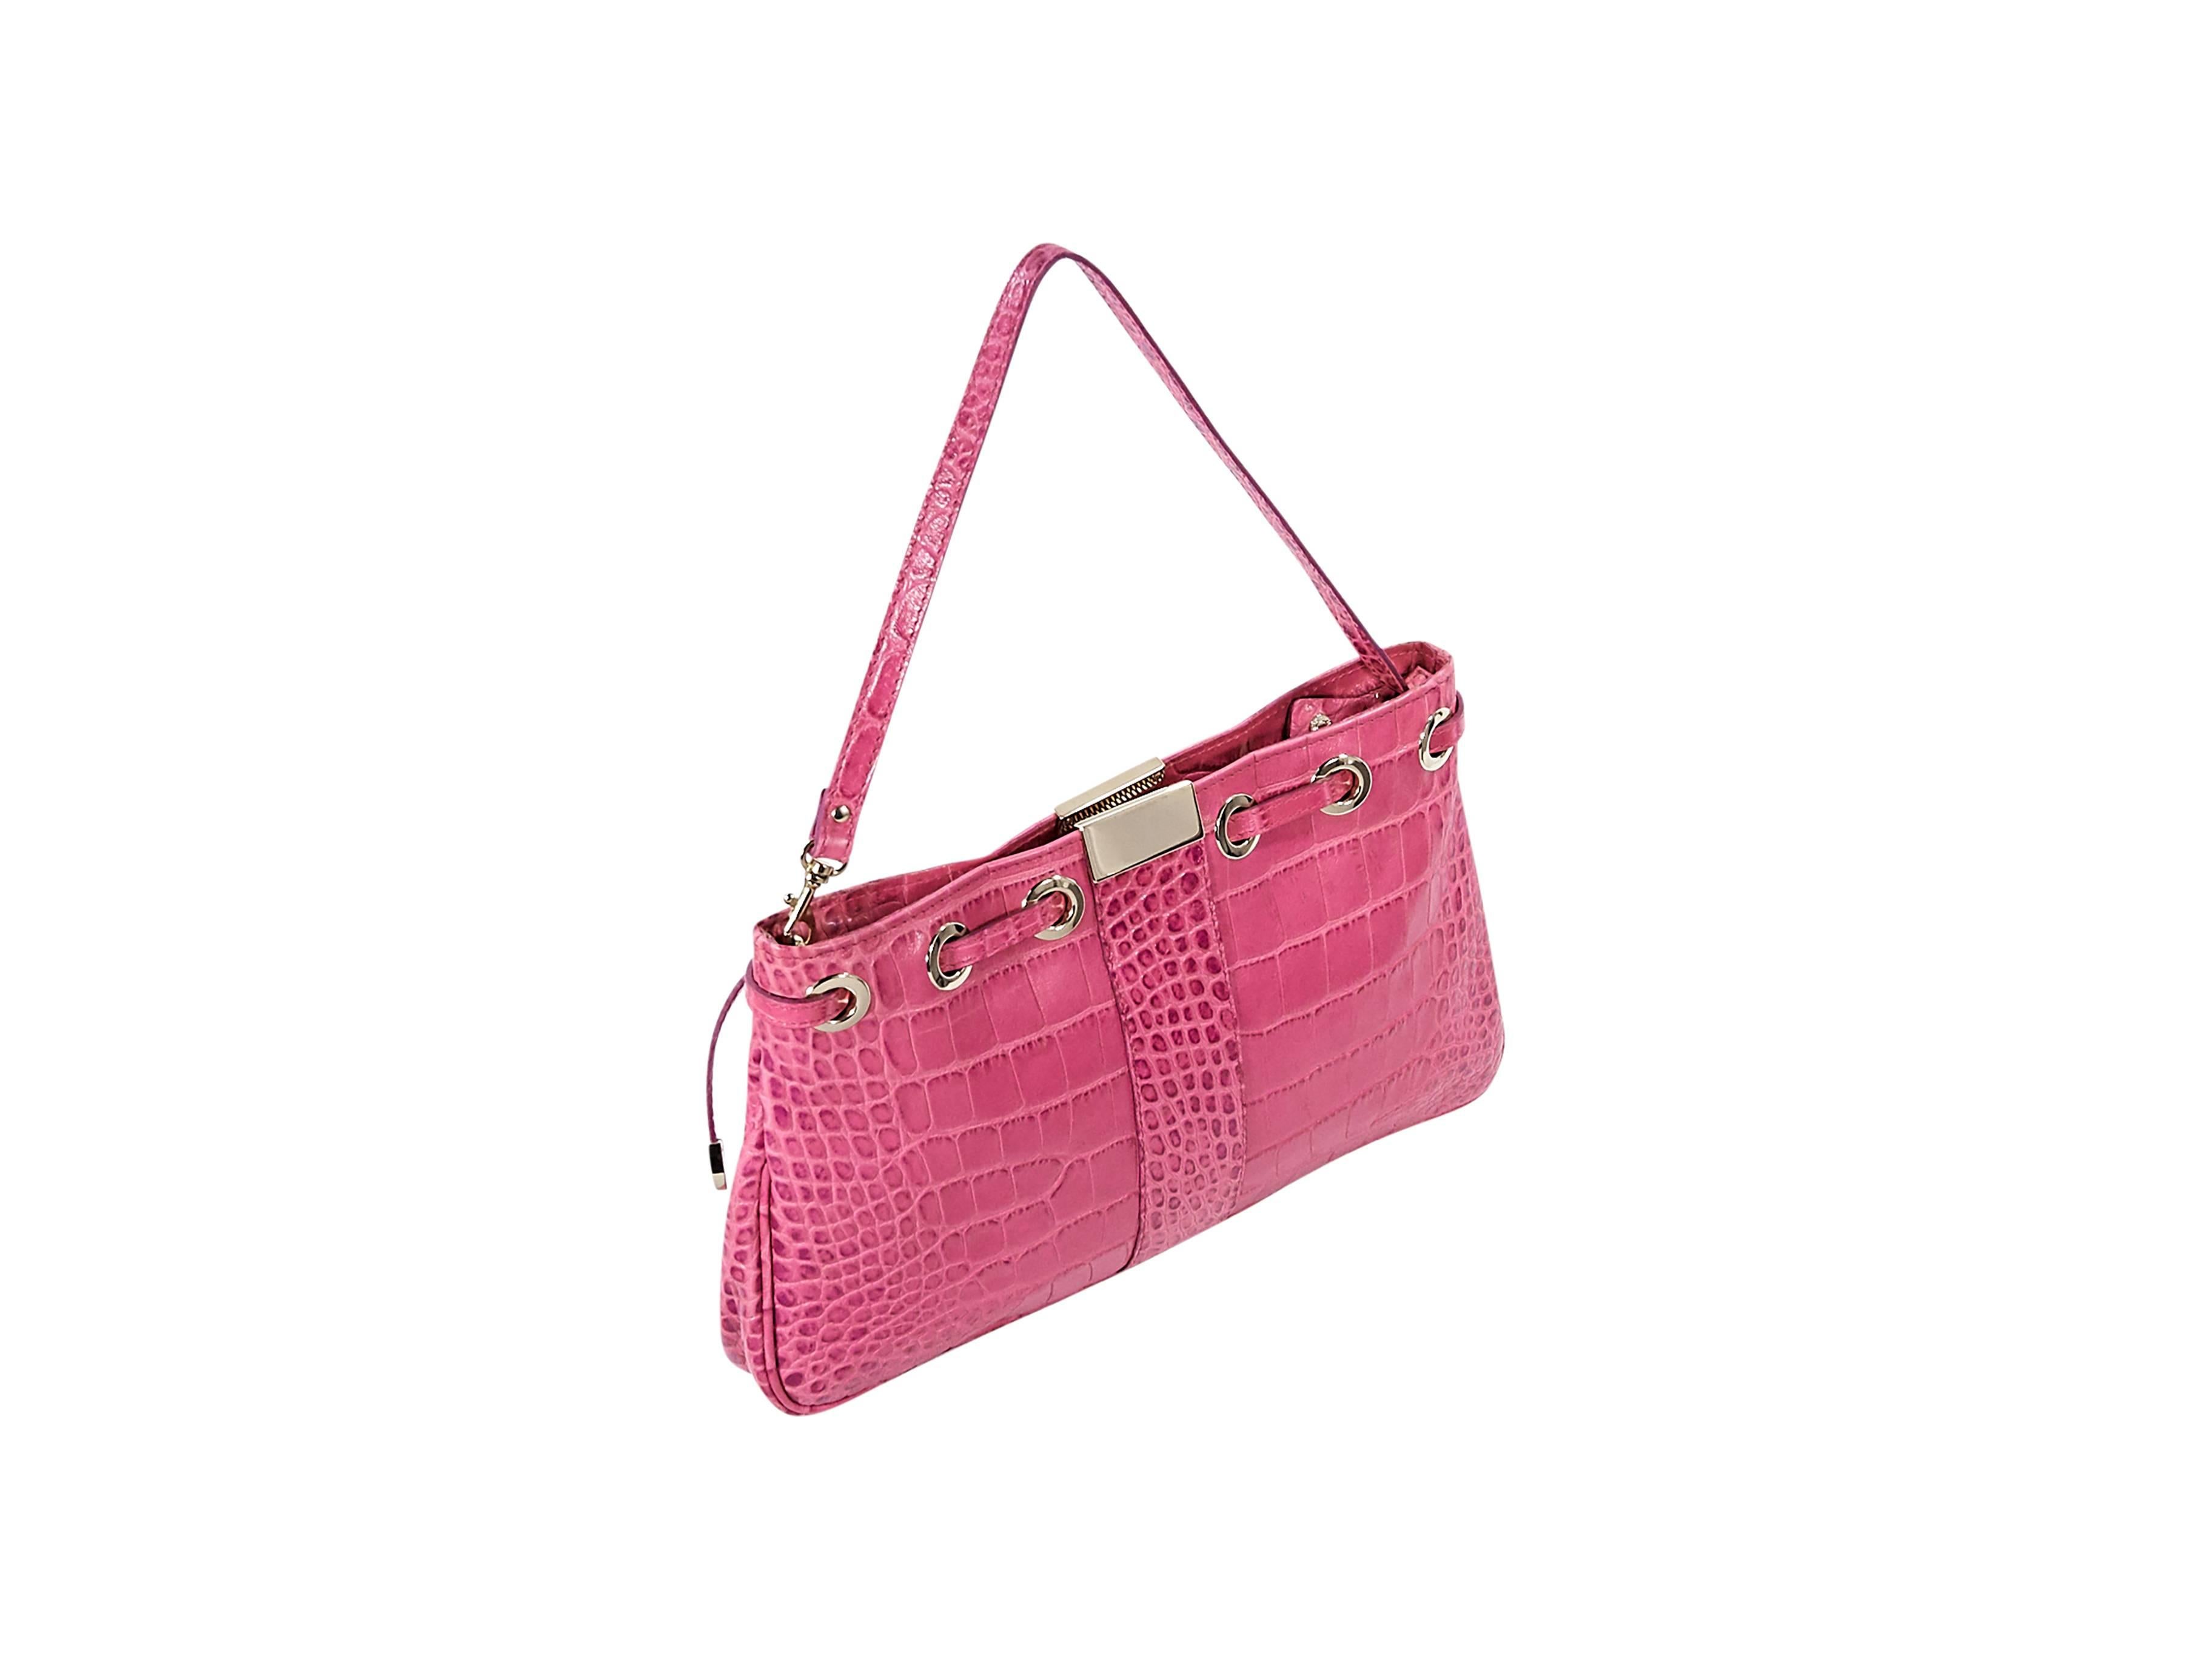 Product details:  Pink embossed leather small shoulder bag by Jimmy Choo.  Woven drawstring detail.  Top zip closure.  Lined interior with inner zip and slide pockets.  Goldtone hardware. Authenticity card included.  13